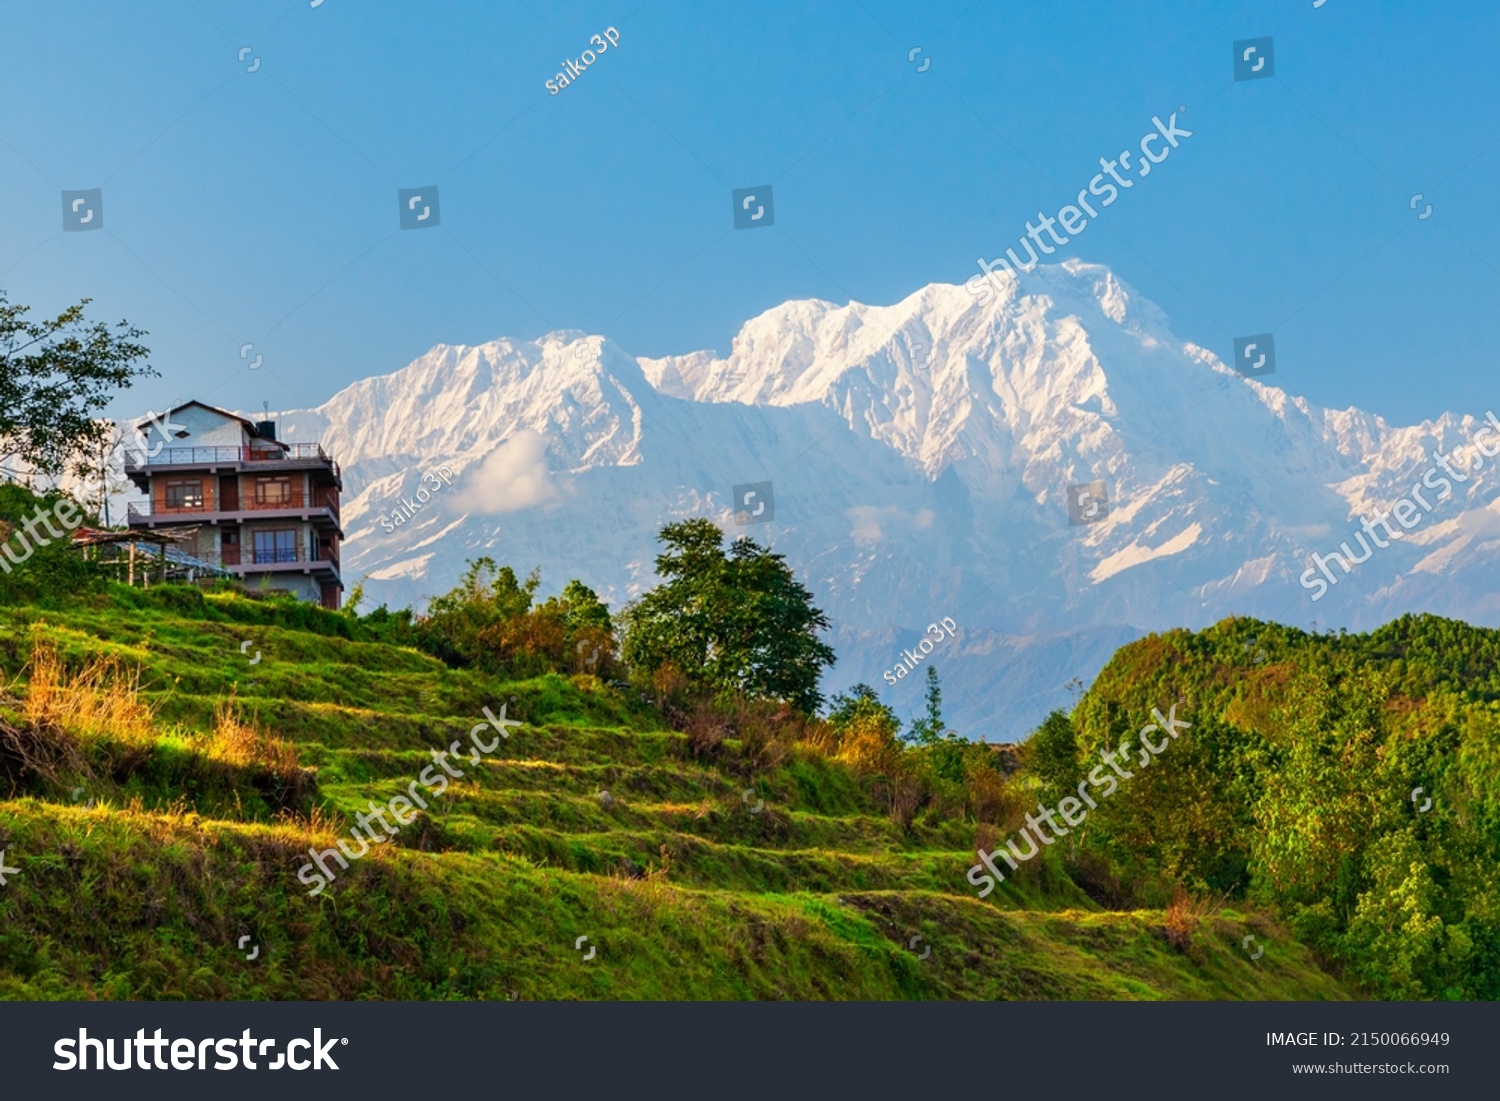 Local house and Annapurna massif view from Sarangkot hill viewpoint in Himalayas mountain range in Pokhara, Nepal #2150066949